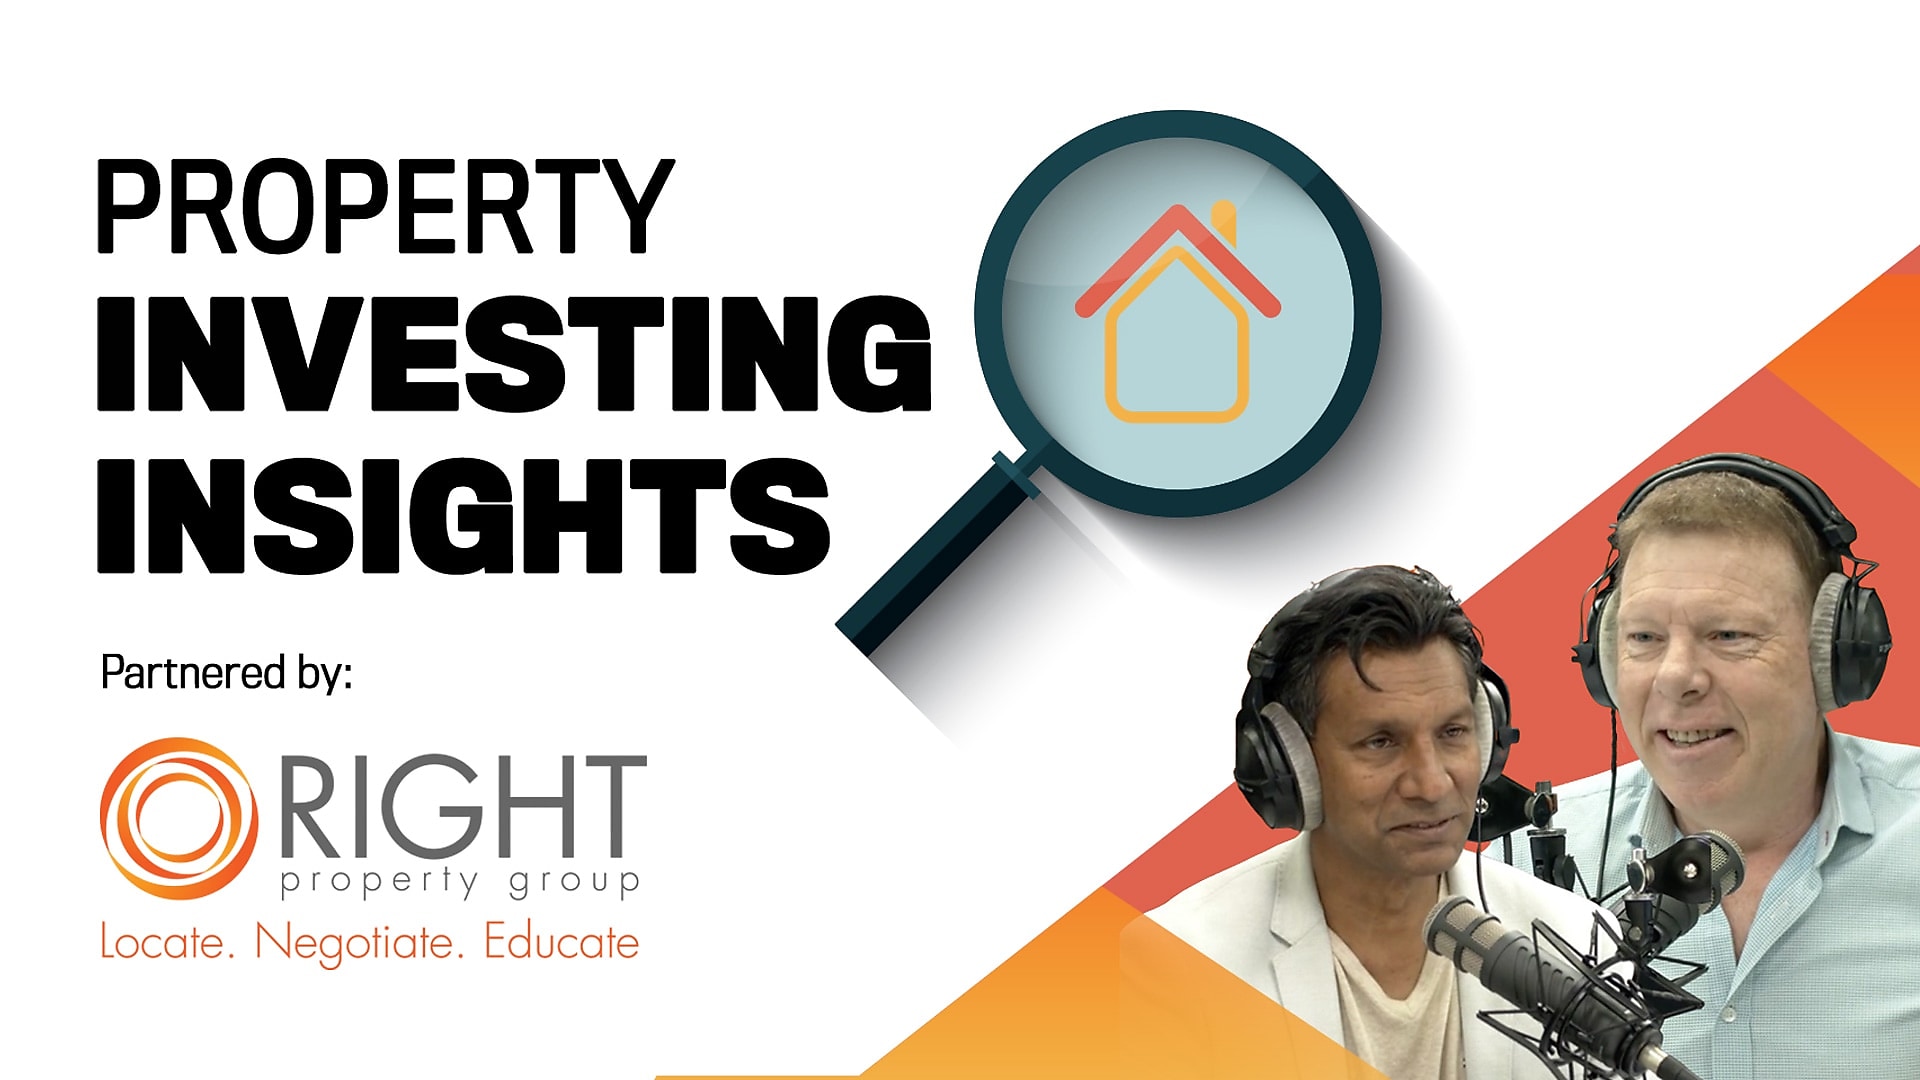 Property Investing Insights Article Image peuir2